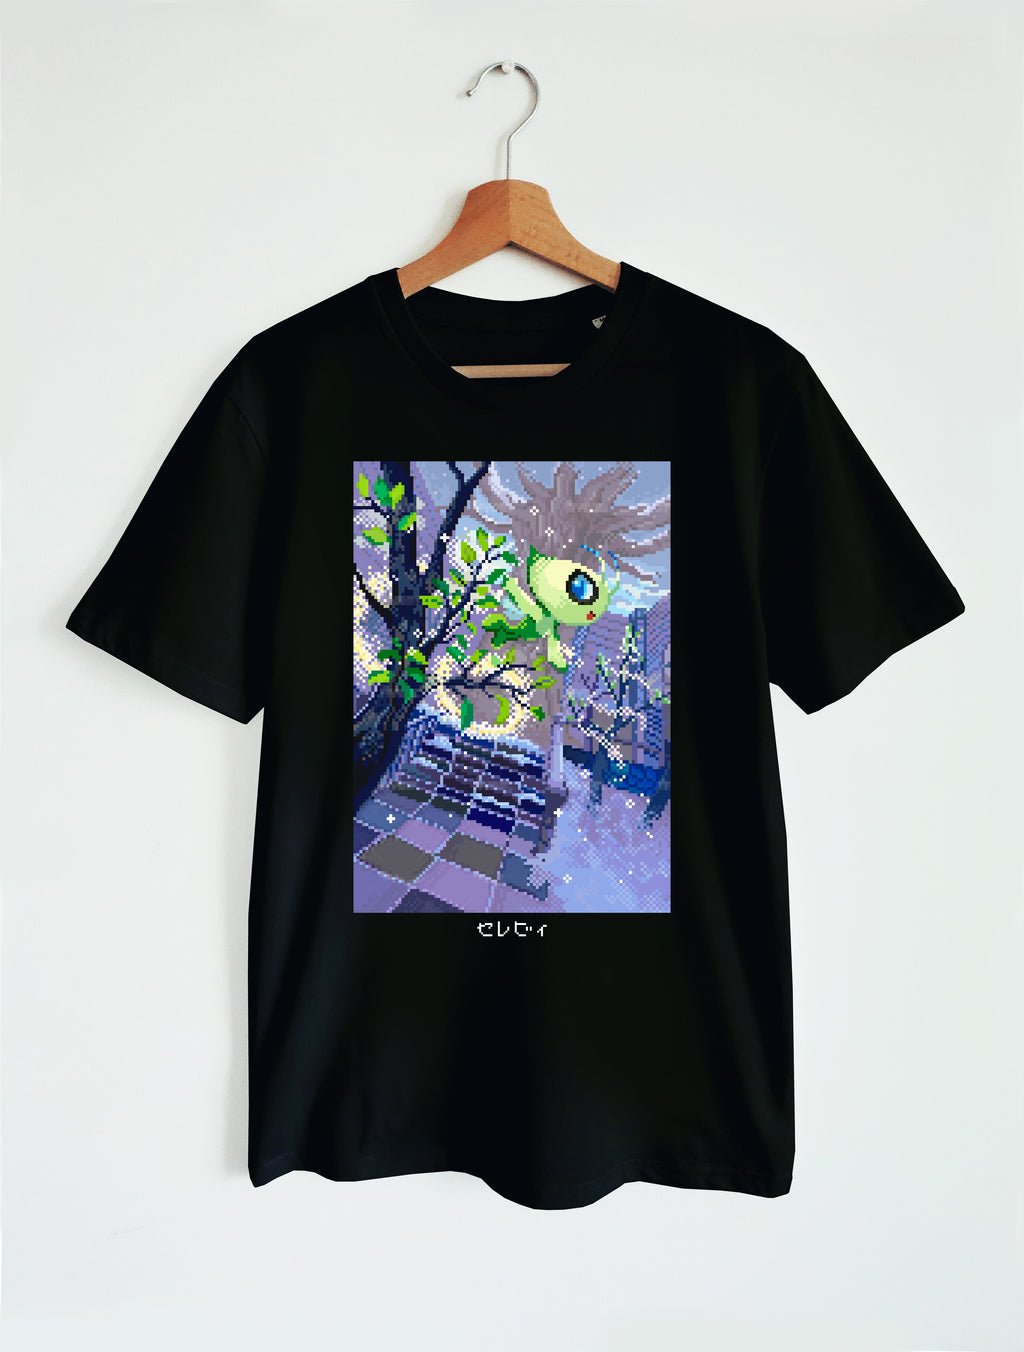 UNISEX T-SHIRT / PKM FULL ART - VOICE OF THE FOREST